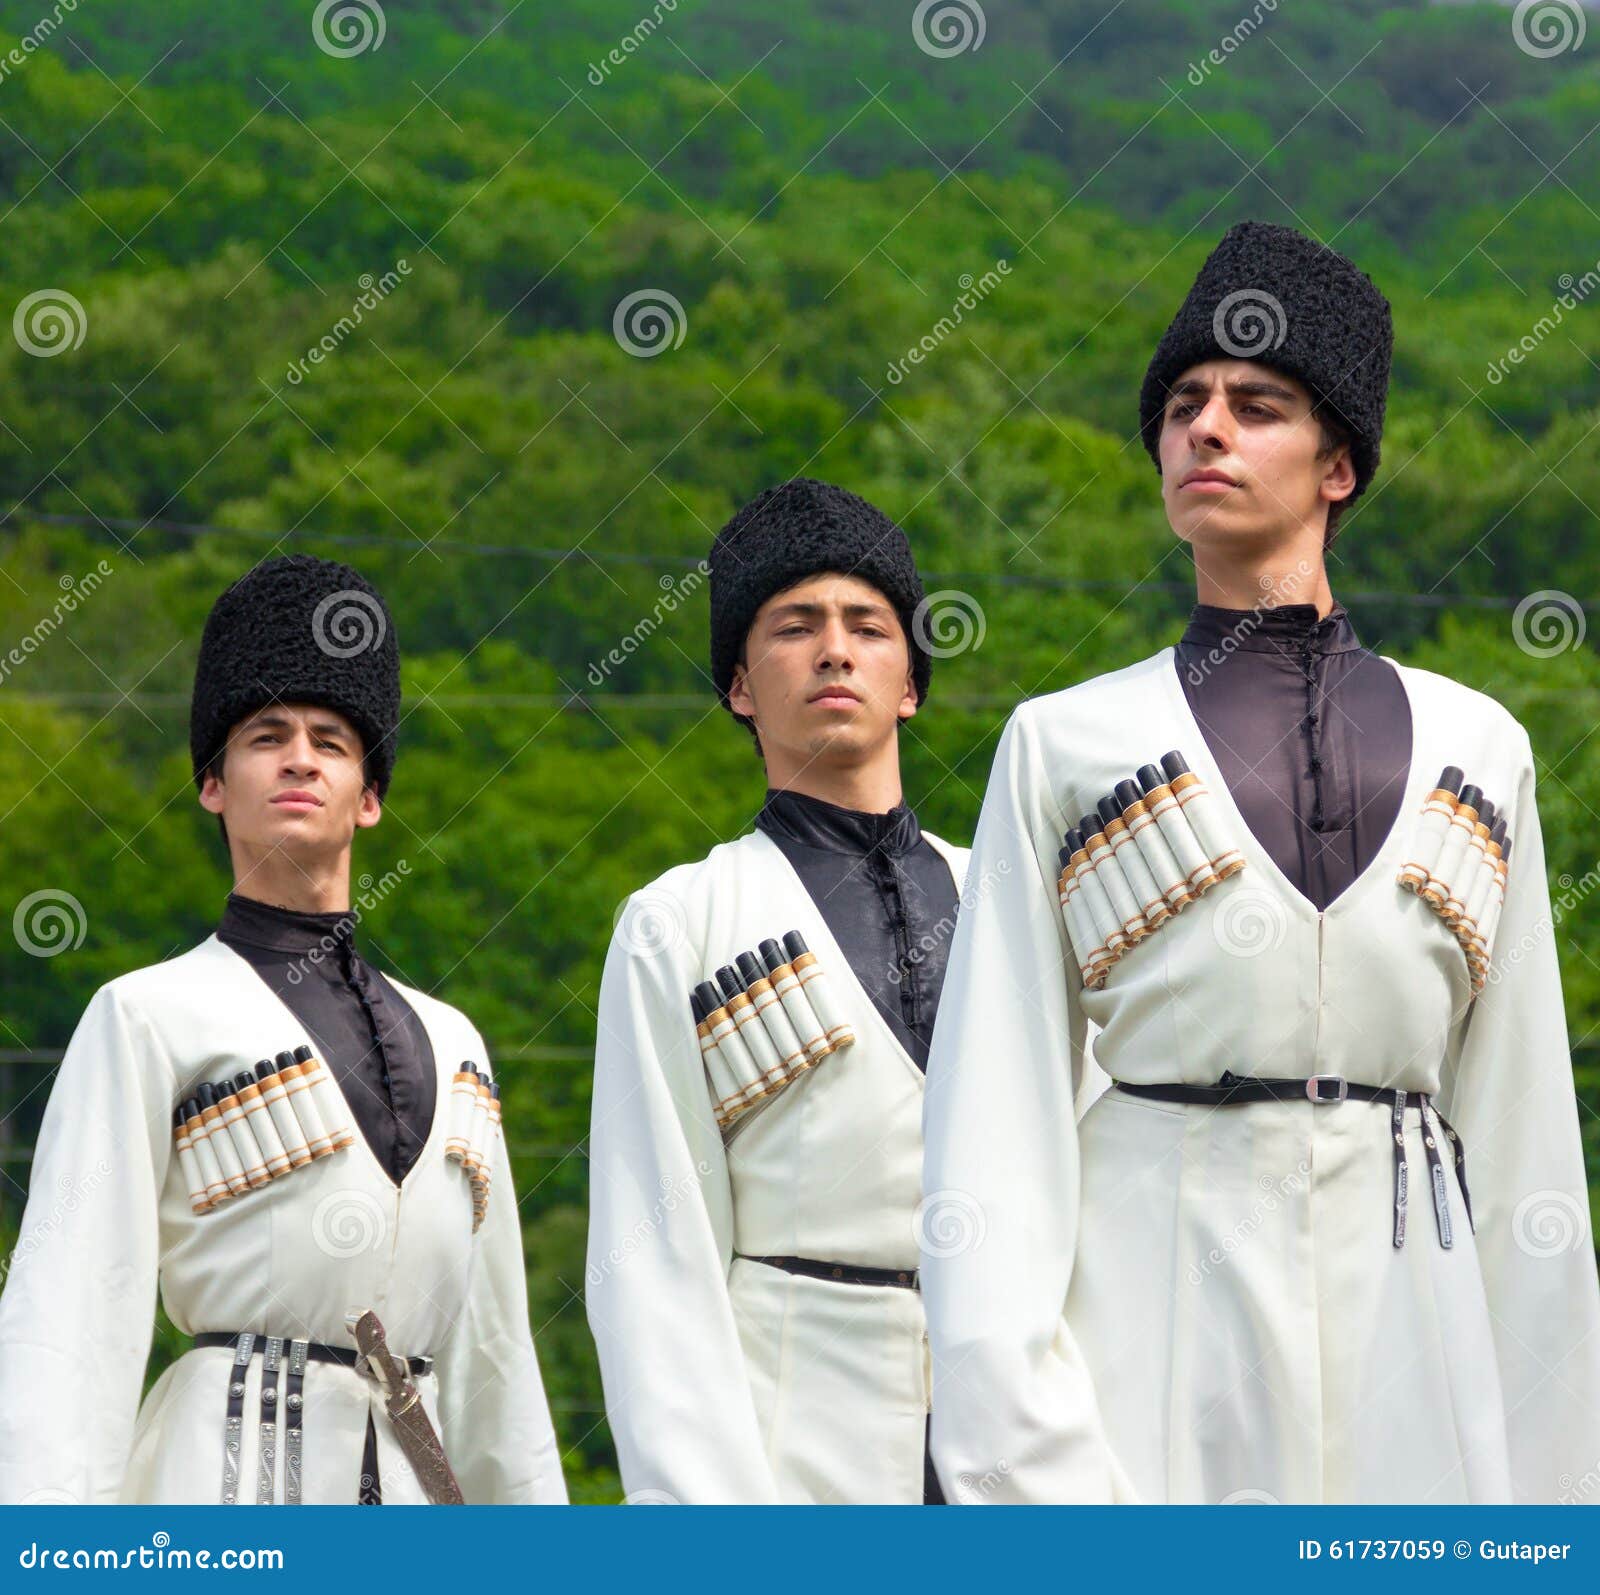 Guys In Adyghe National Costumes Editorial Stock Image Image Of